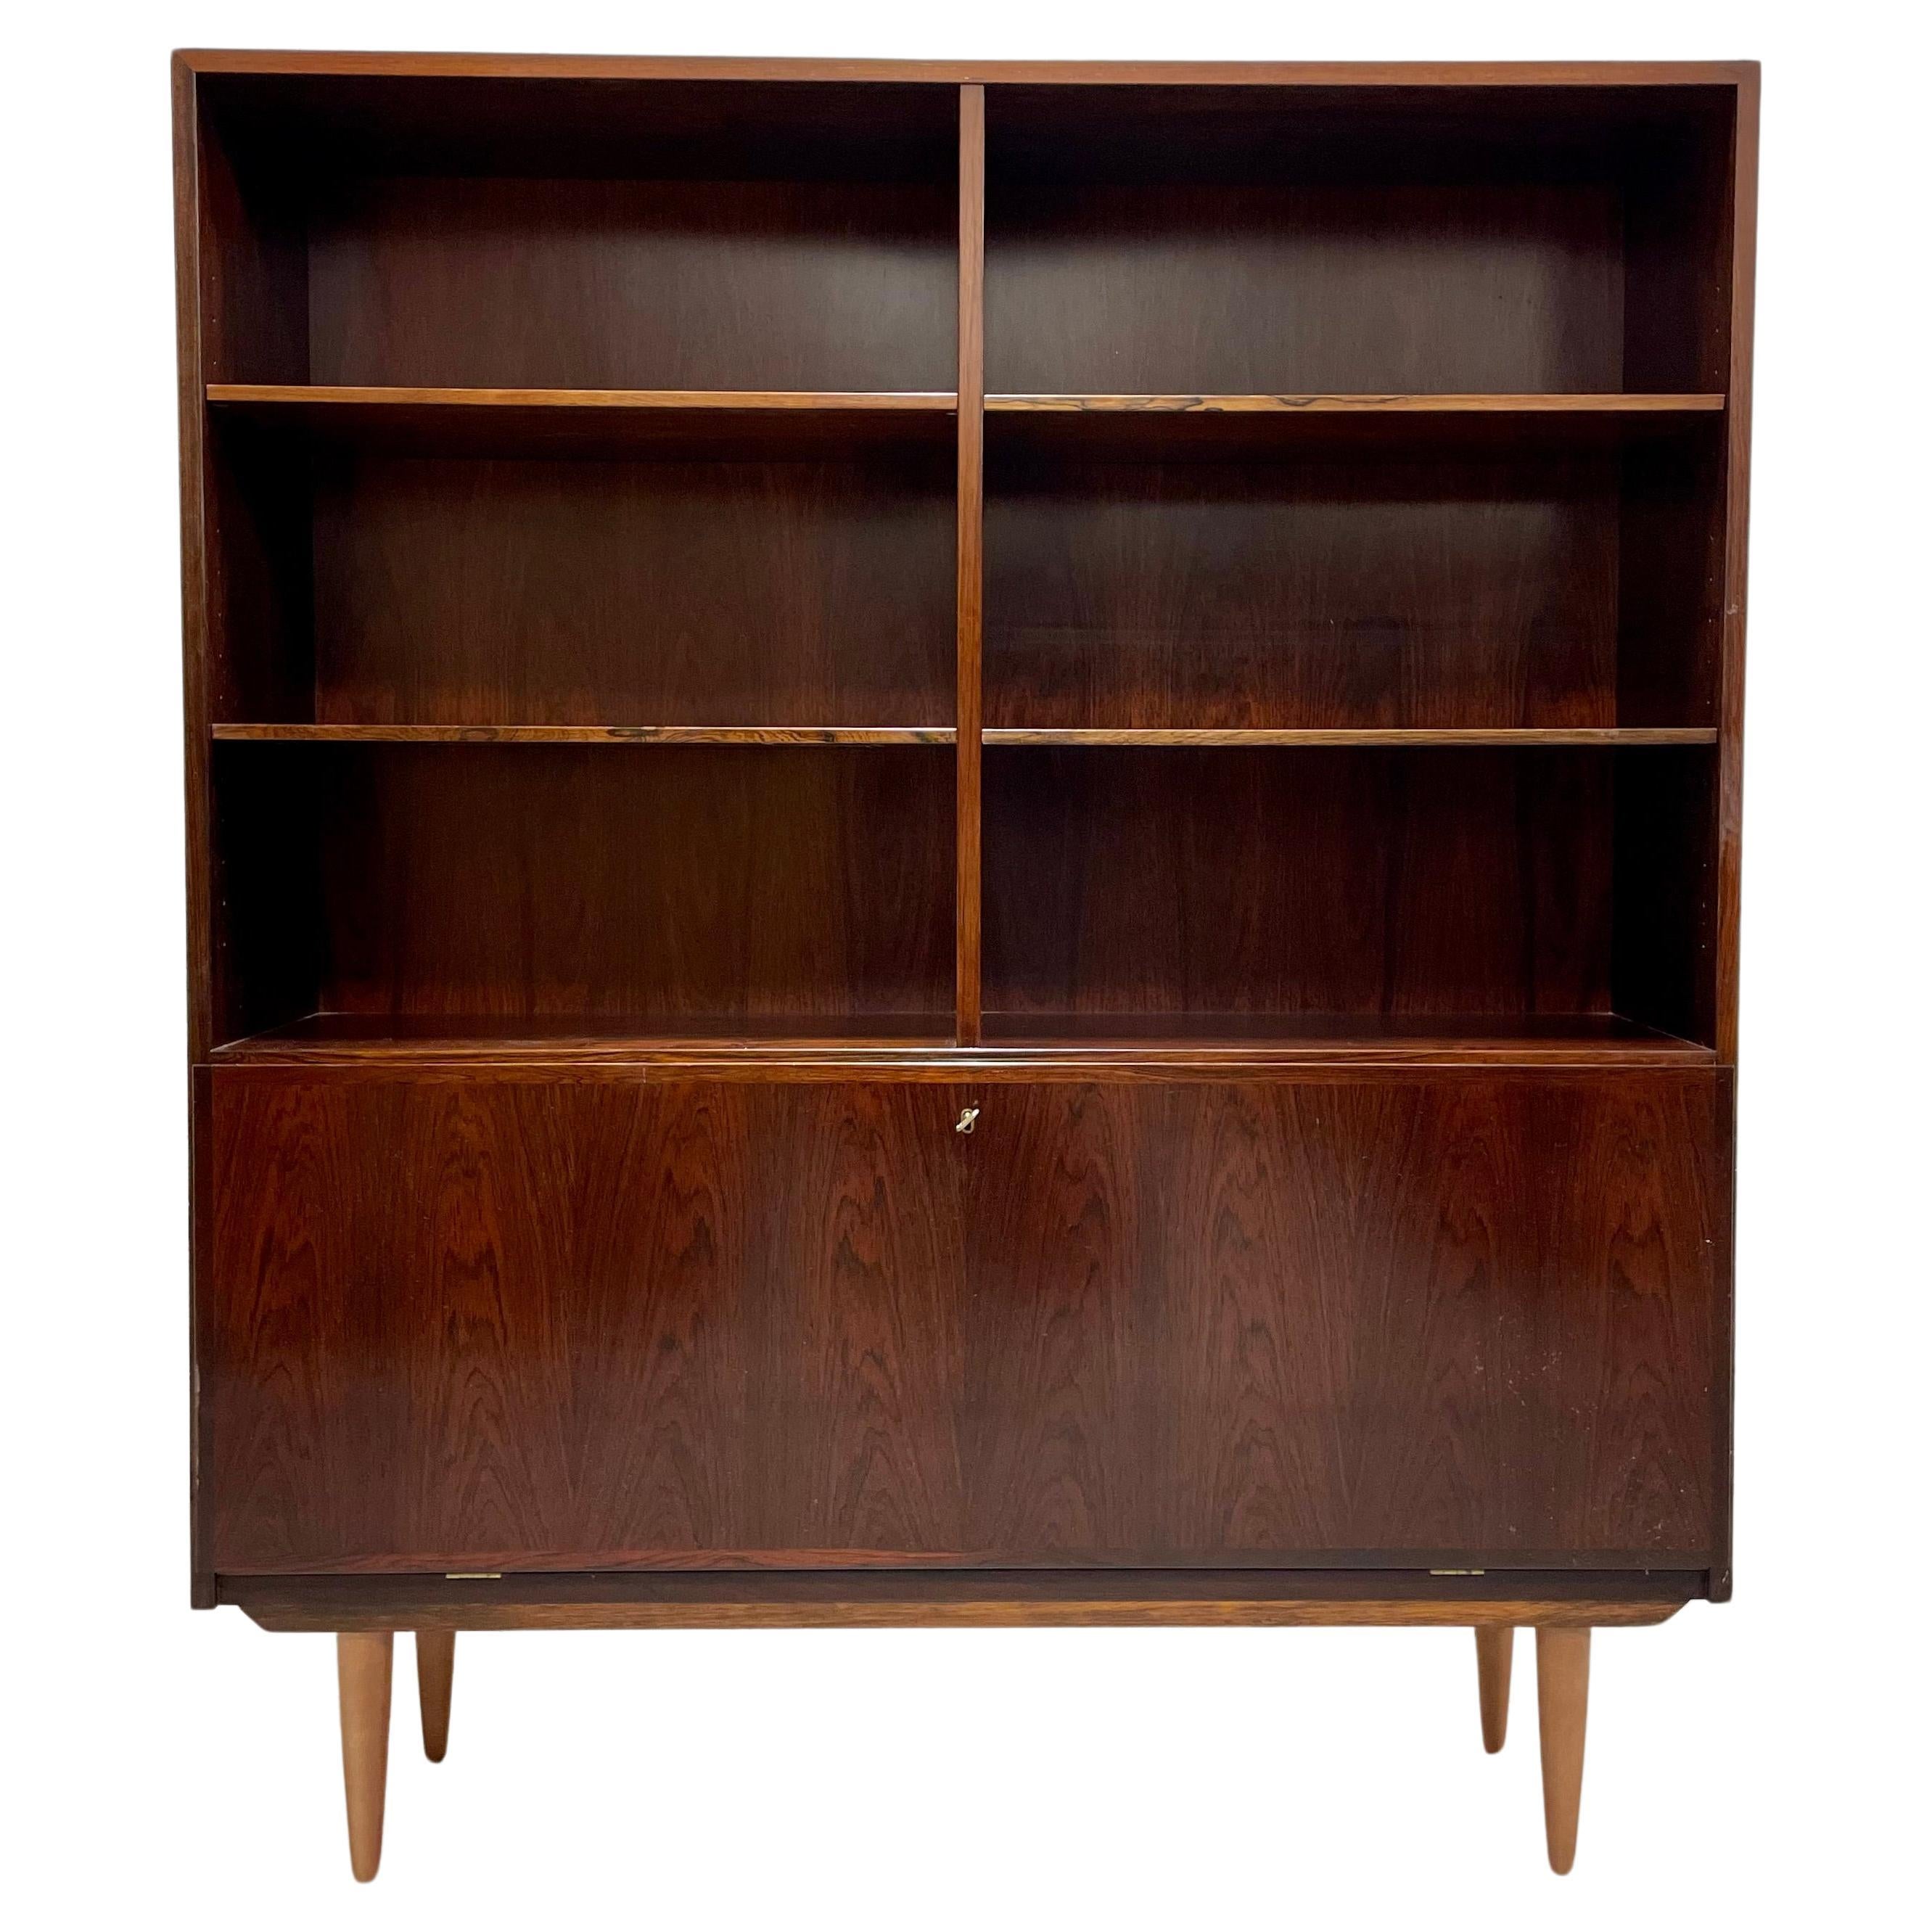 DANISH Mid Century Modern ROSEWOOD BOOKCASE / China Cabinet, c. 1960's For Sale